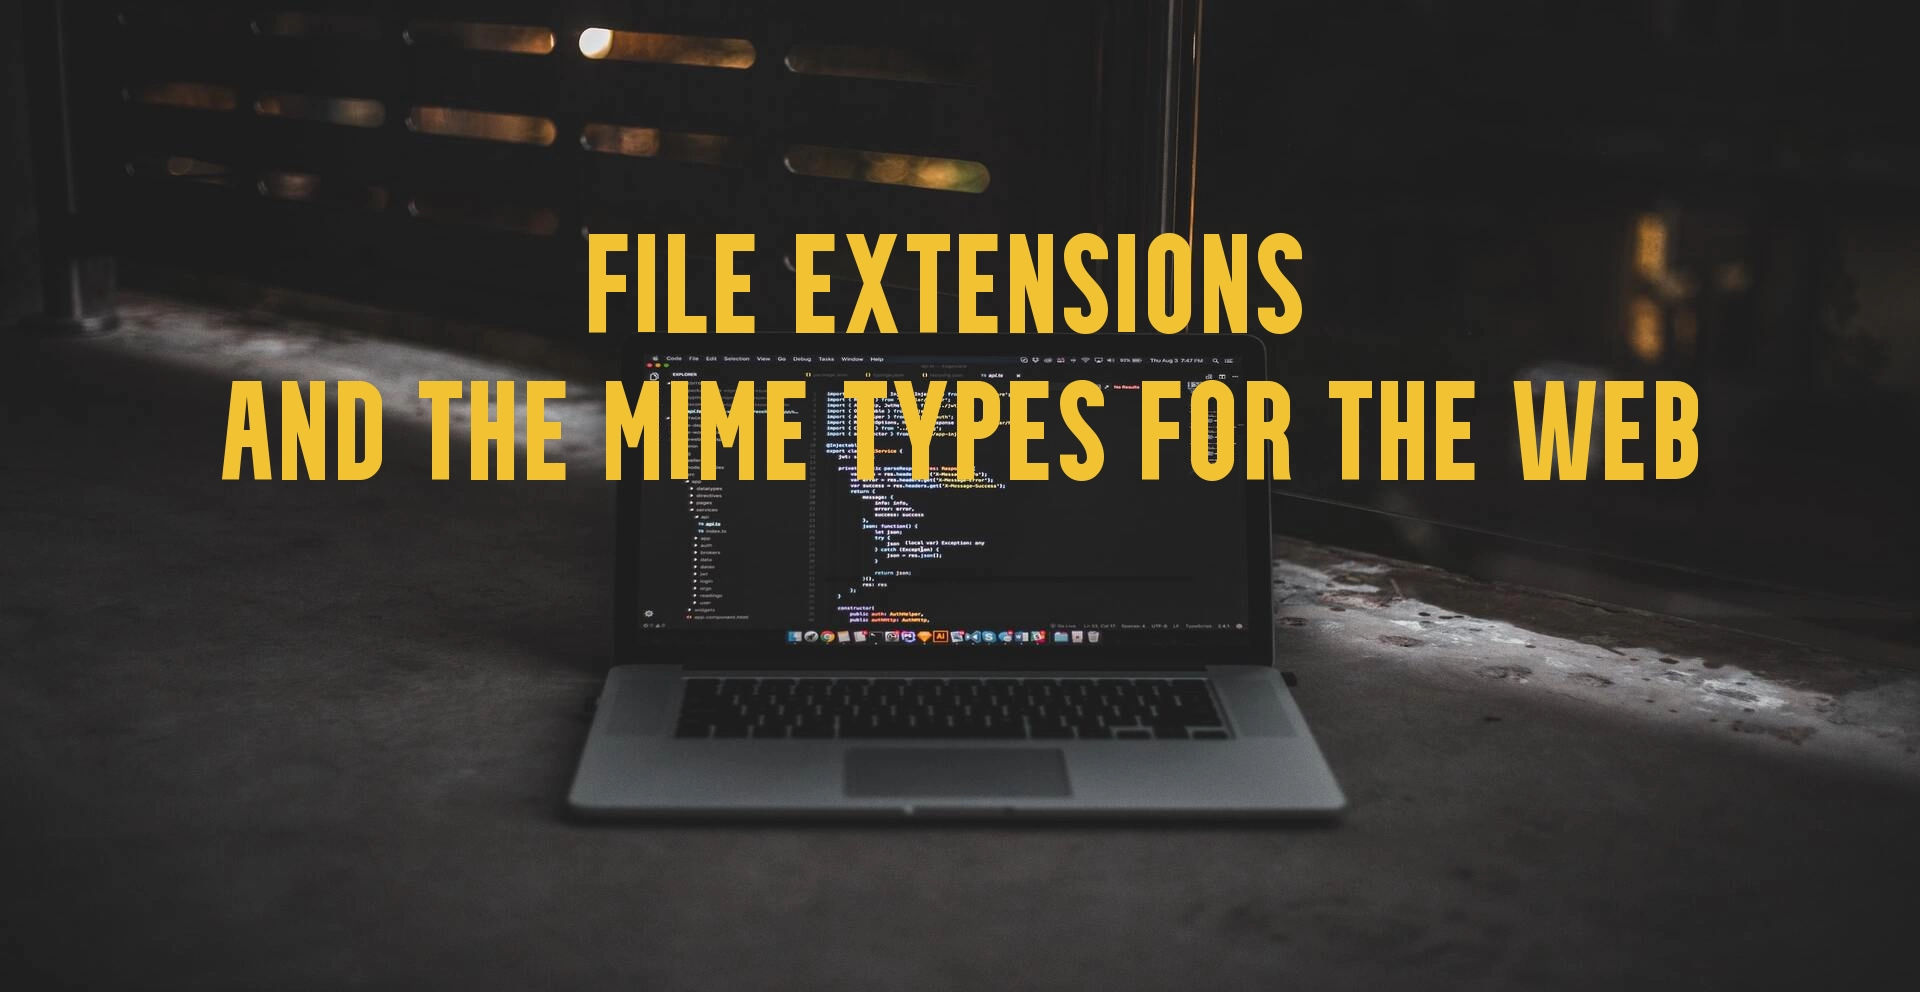 Cover Image for File extensions, description and the MIME types for the Web